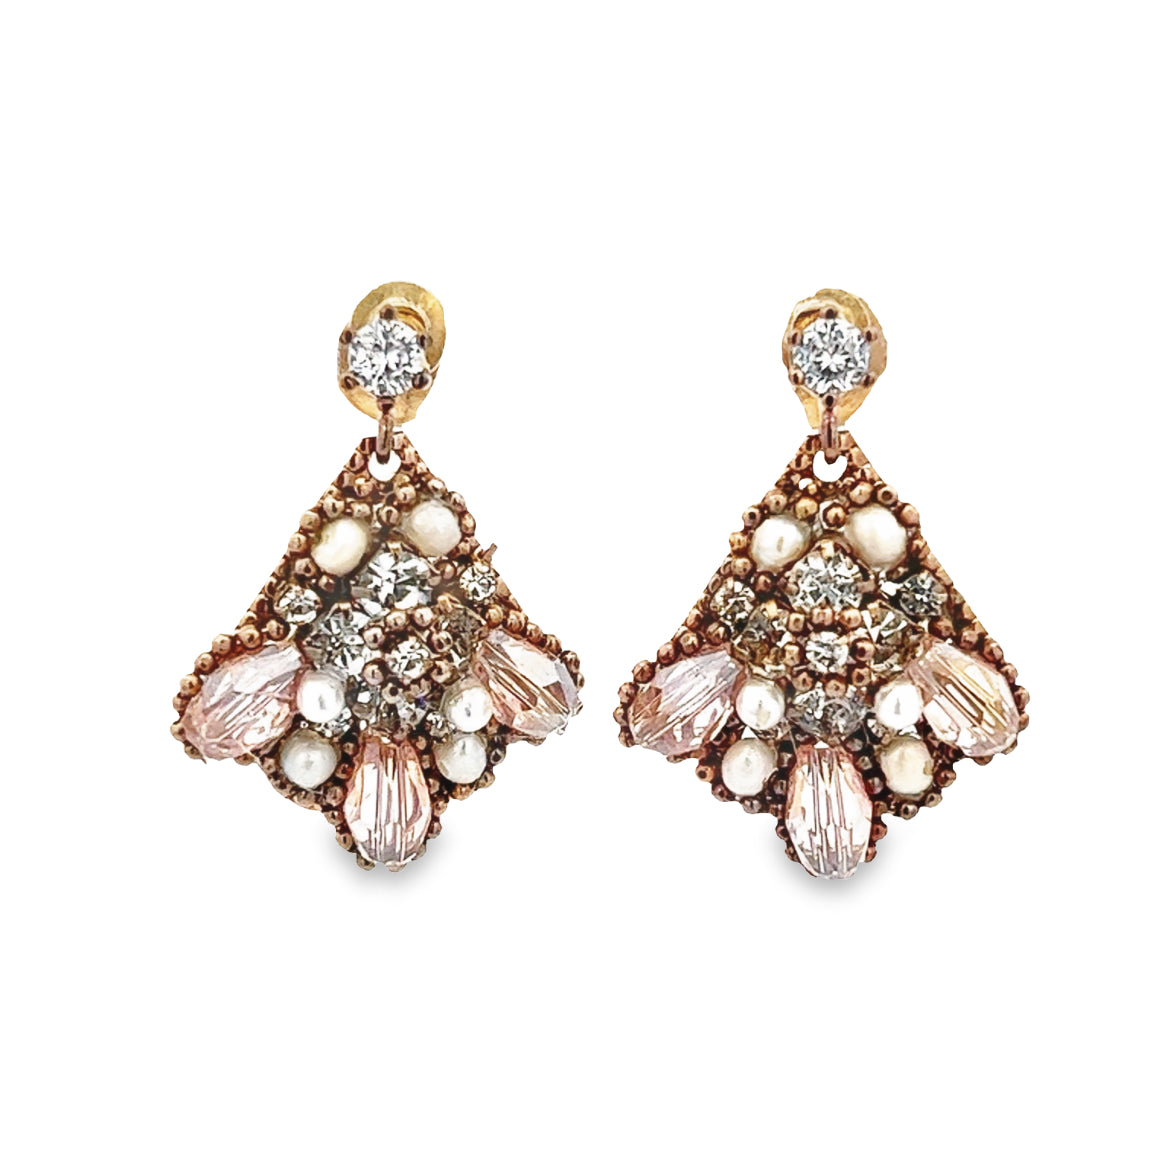 925 GOLD PLATED DROP EARRINGS WITH SWAROVSKI CRYSTALS